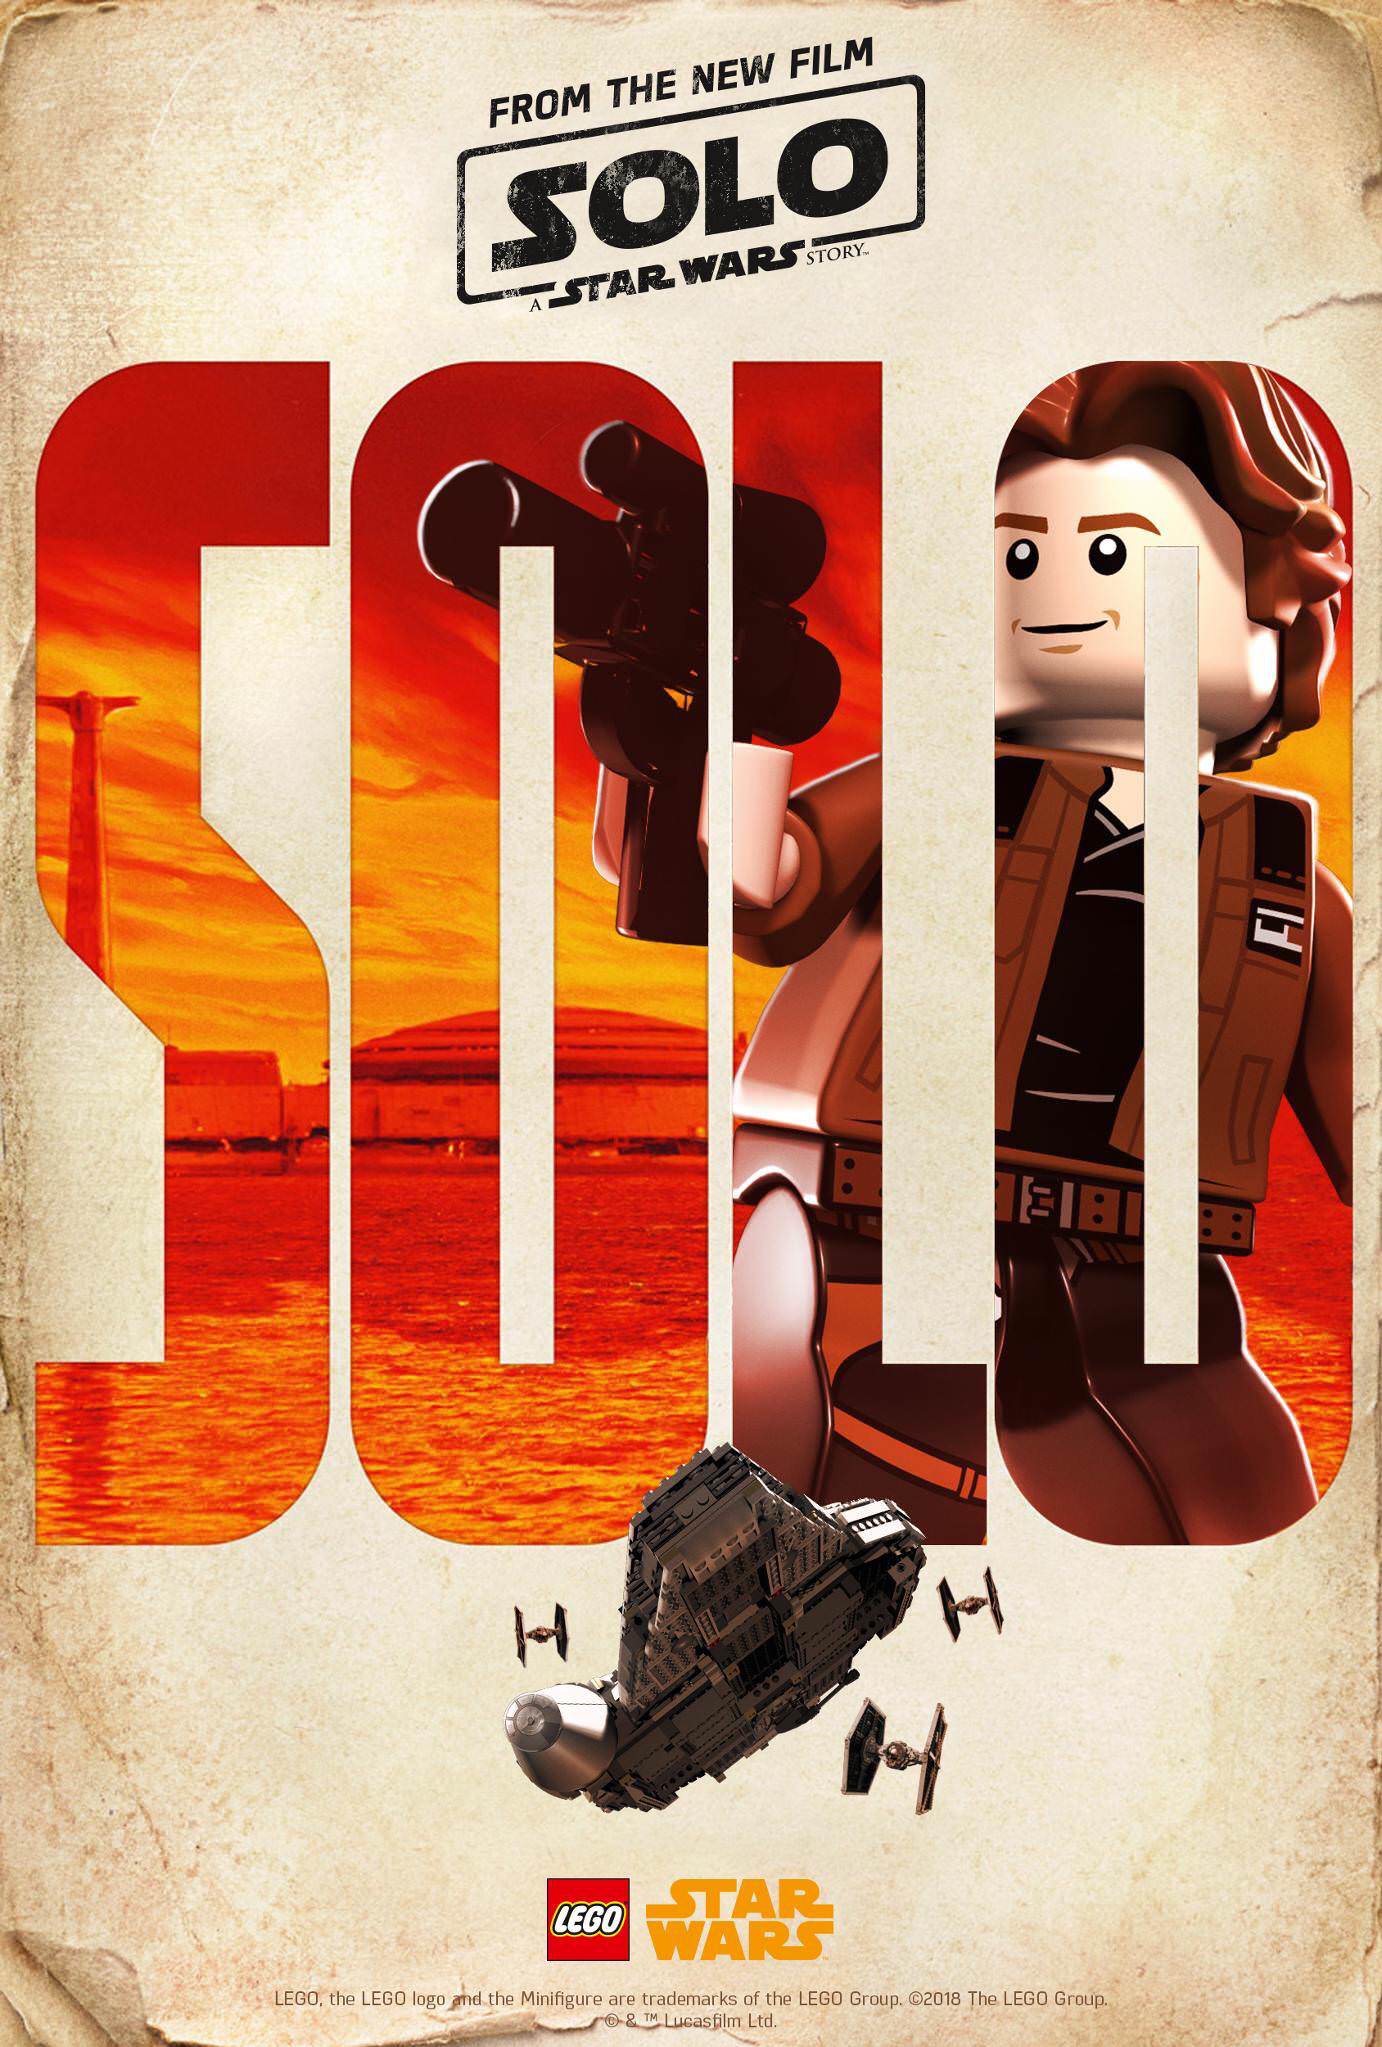 LEGO Solo: A Star Wars Story poster